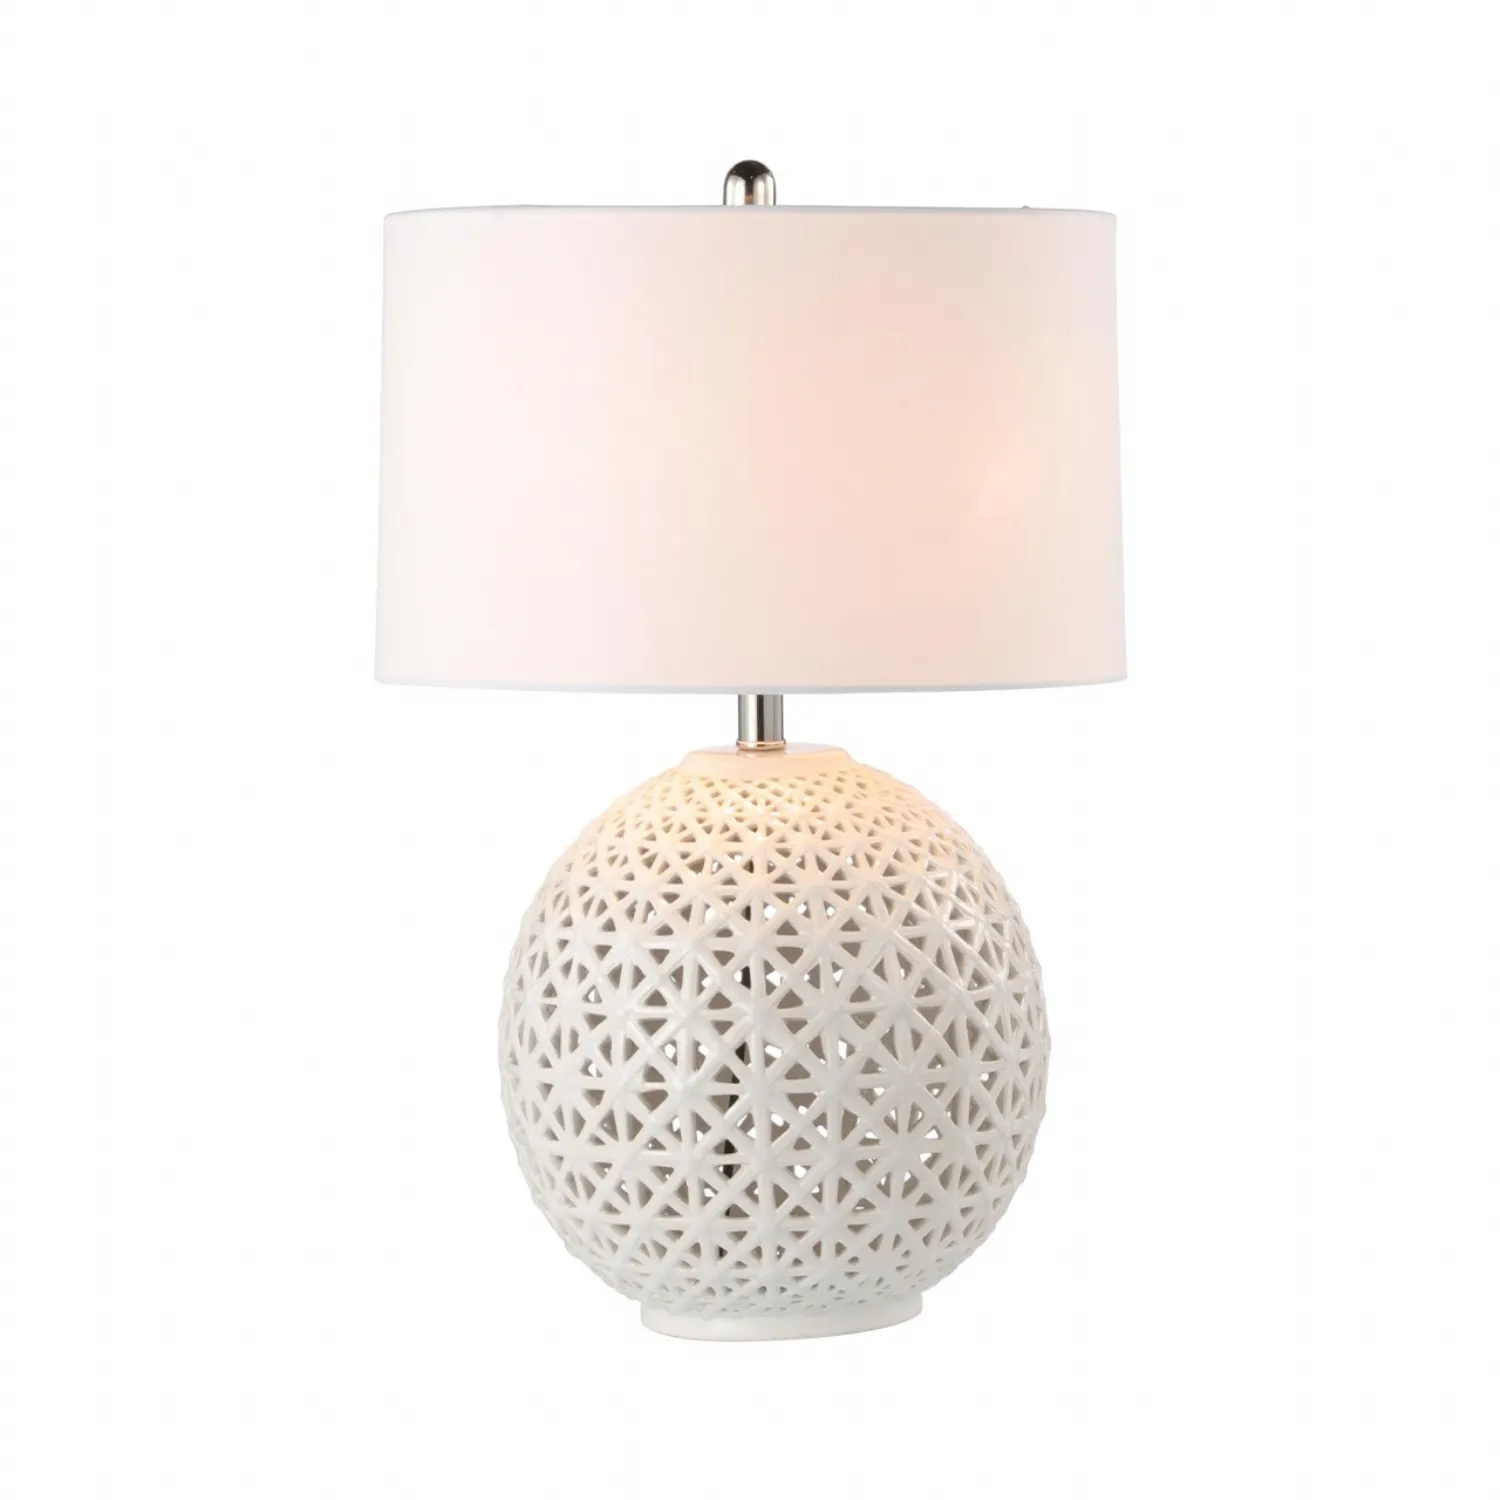 64. 8cm White Patterned Ceramic Table Lamp With White Linen Shade